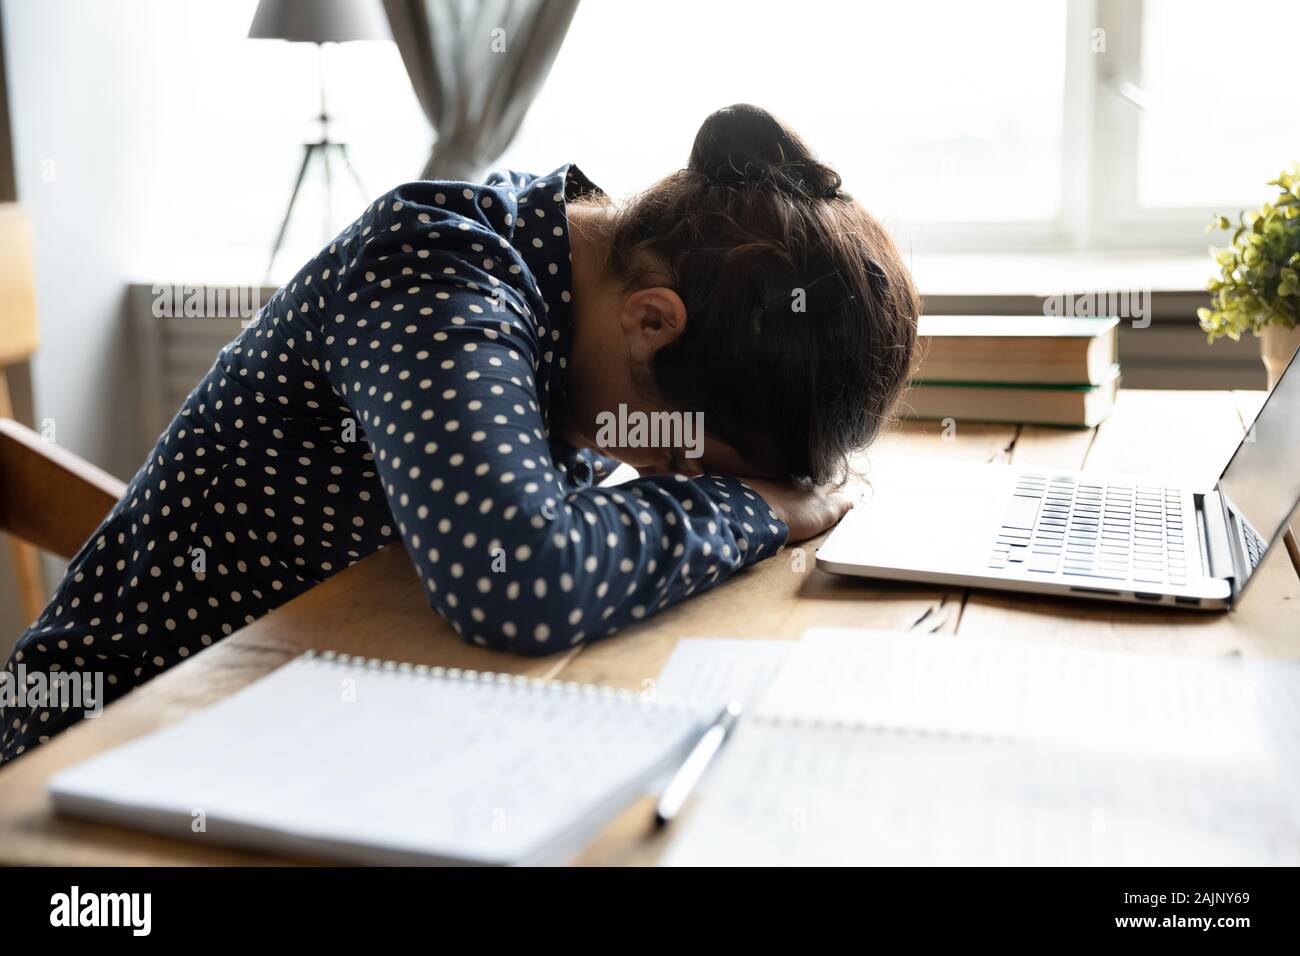 Tired indian girl student sleeping at desk exhausted after learning Stock Photo